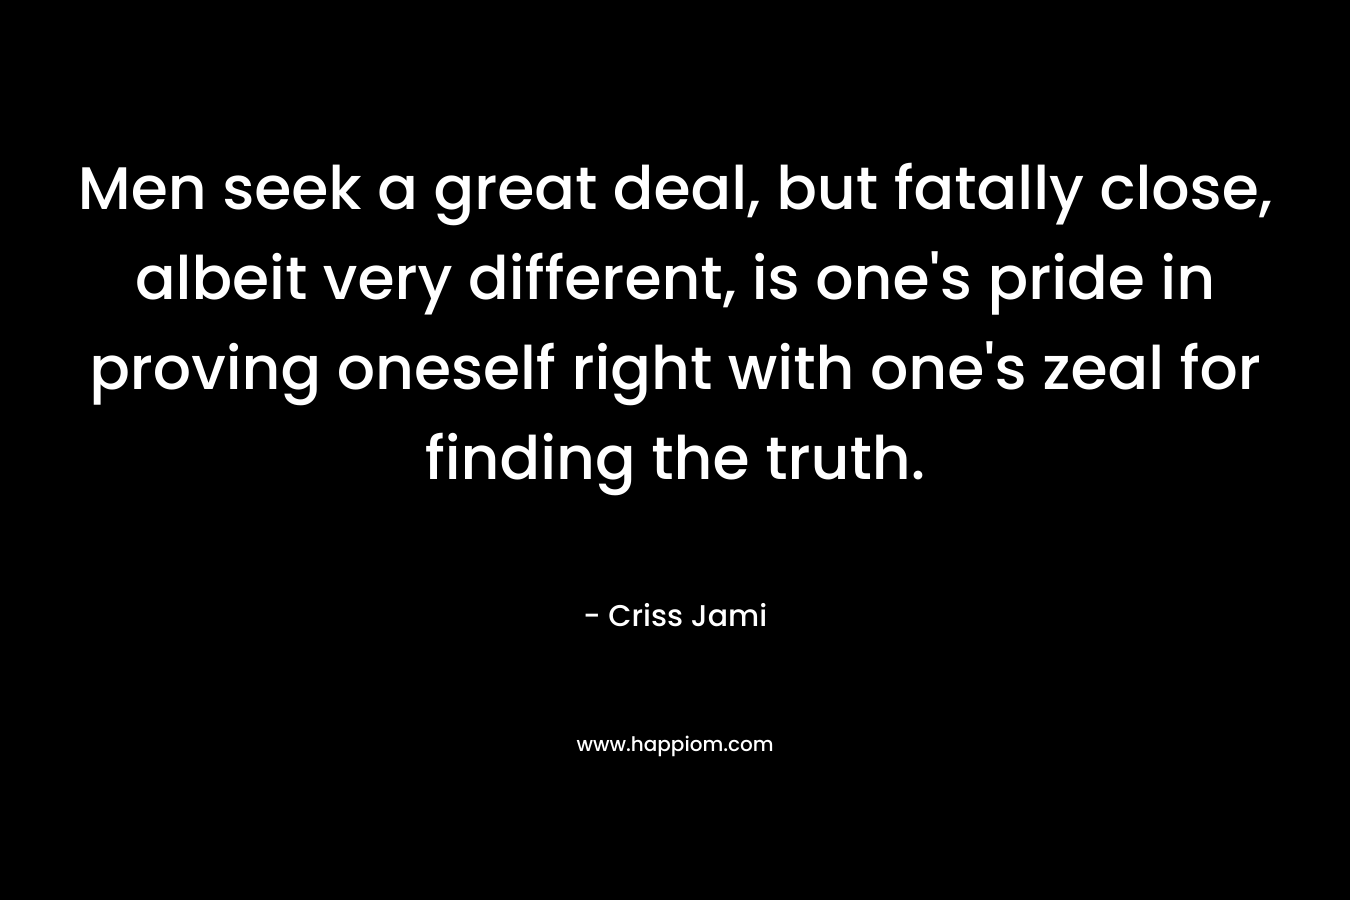 Men seek a great deal, but fatally close, albeit very different, is one's pride in proving oneself right with one's zeal for finding the truth.